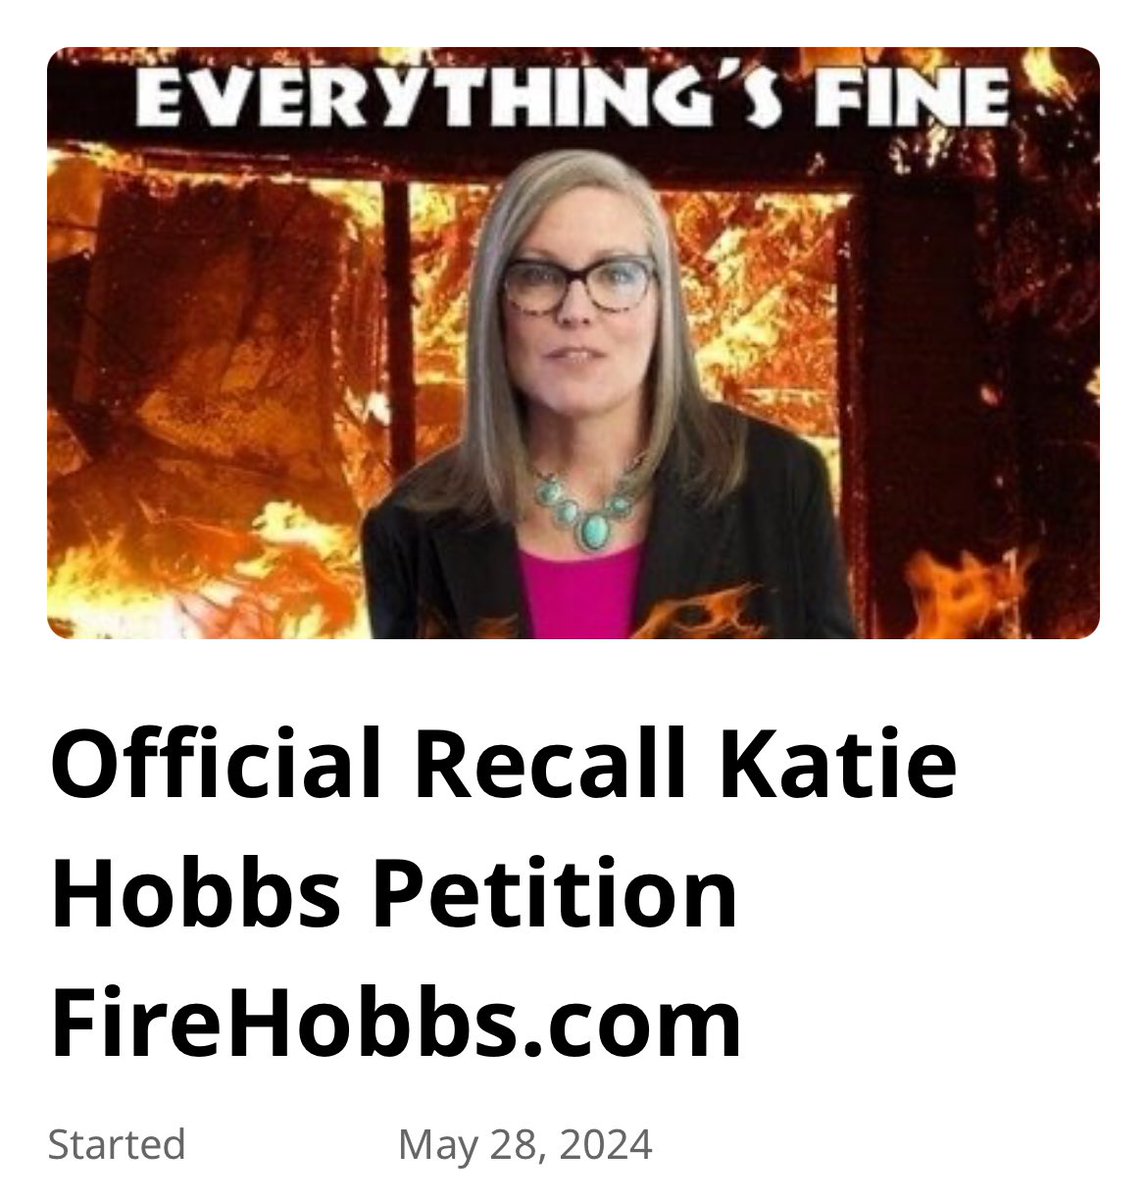 @WallStreetApes 💥 Protect our Kids & sign the online petition to Recall Katie Hobbs! 💥 Every State is a Border State and Katie Hobbs is letting in millions of unvetted illegal aliens to traffick kids! #RecallHobbs change.org/p/official-rec…